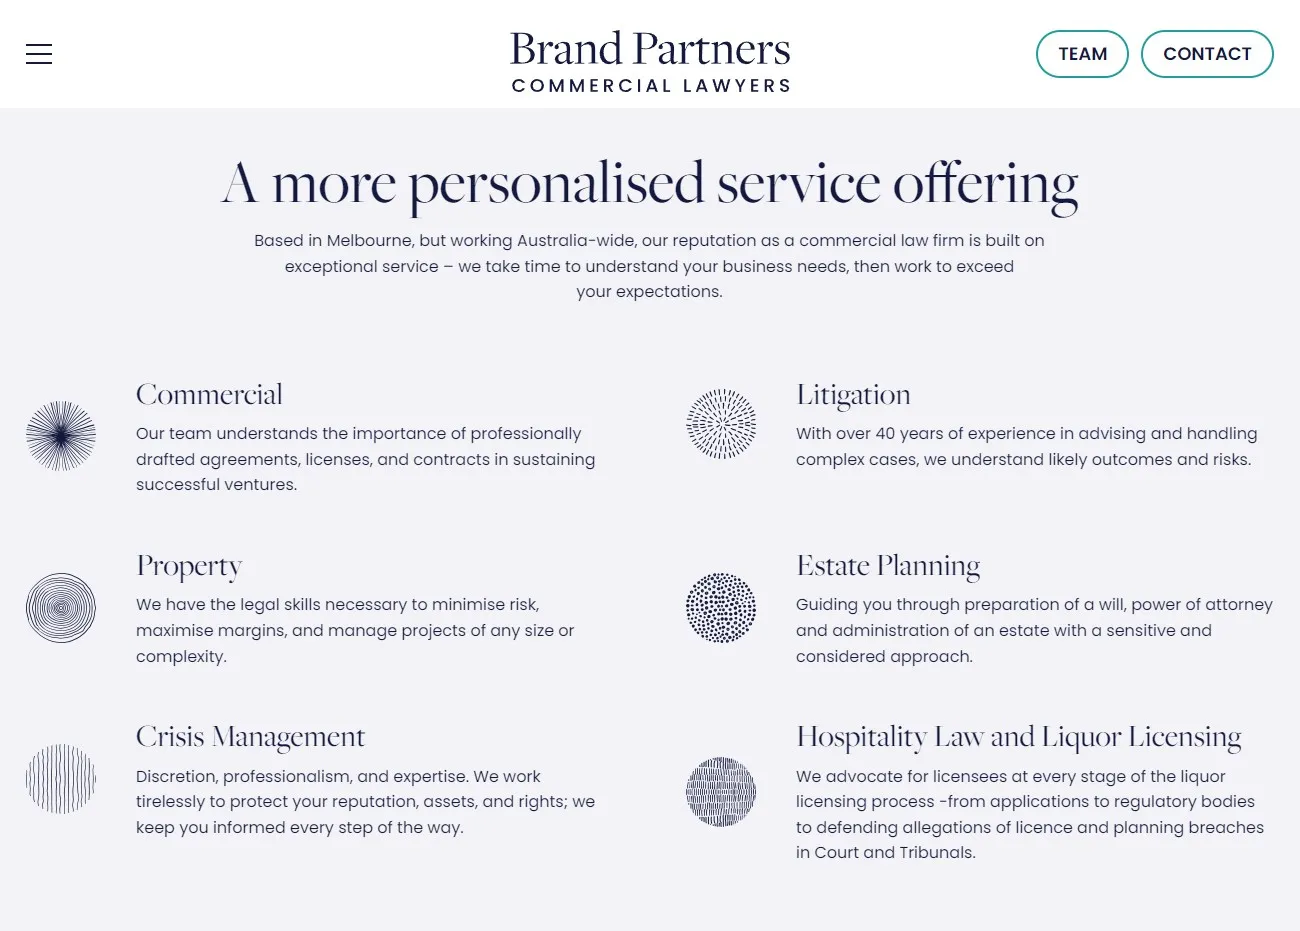 Brand Partners Commercial Lawyers